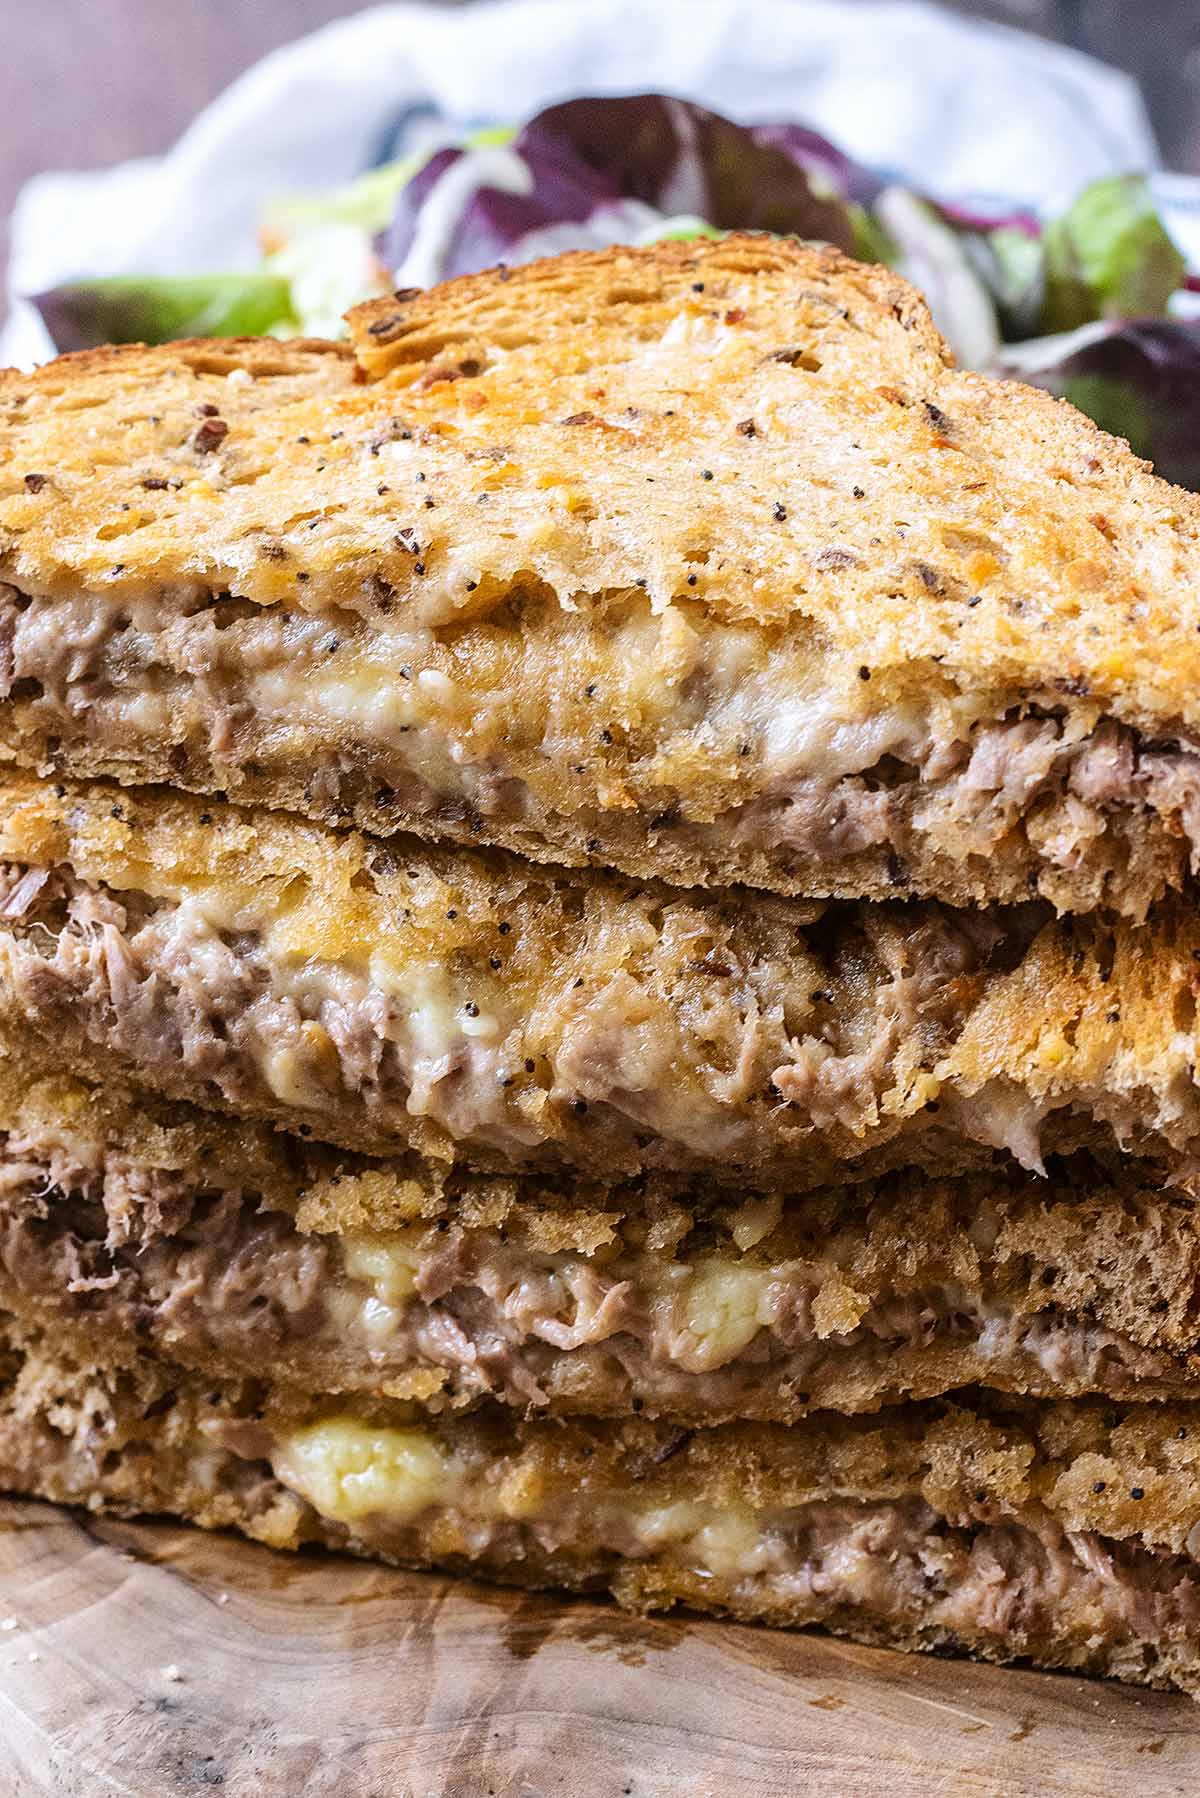 Four triangular toasted tuna sandwiches piled up on top of each other.